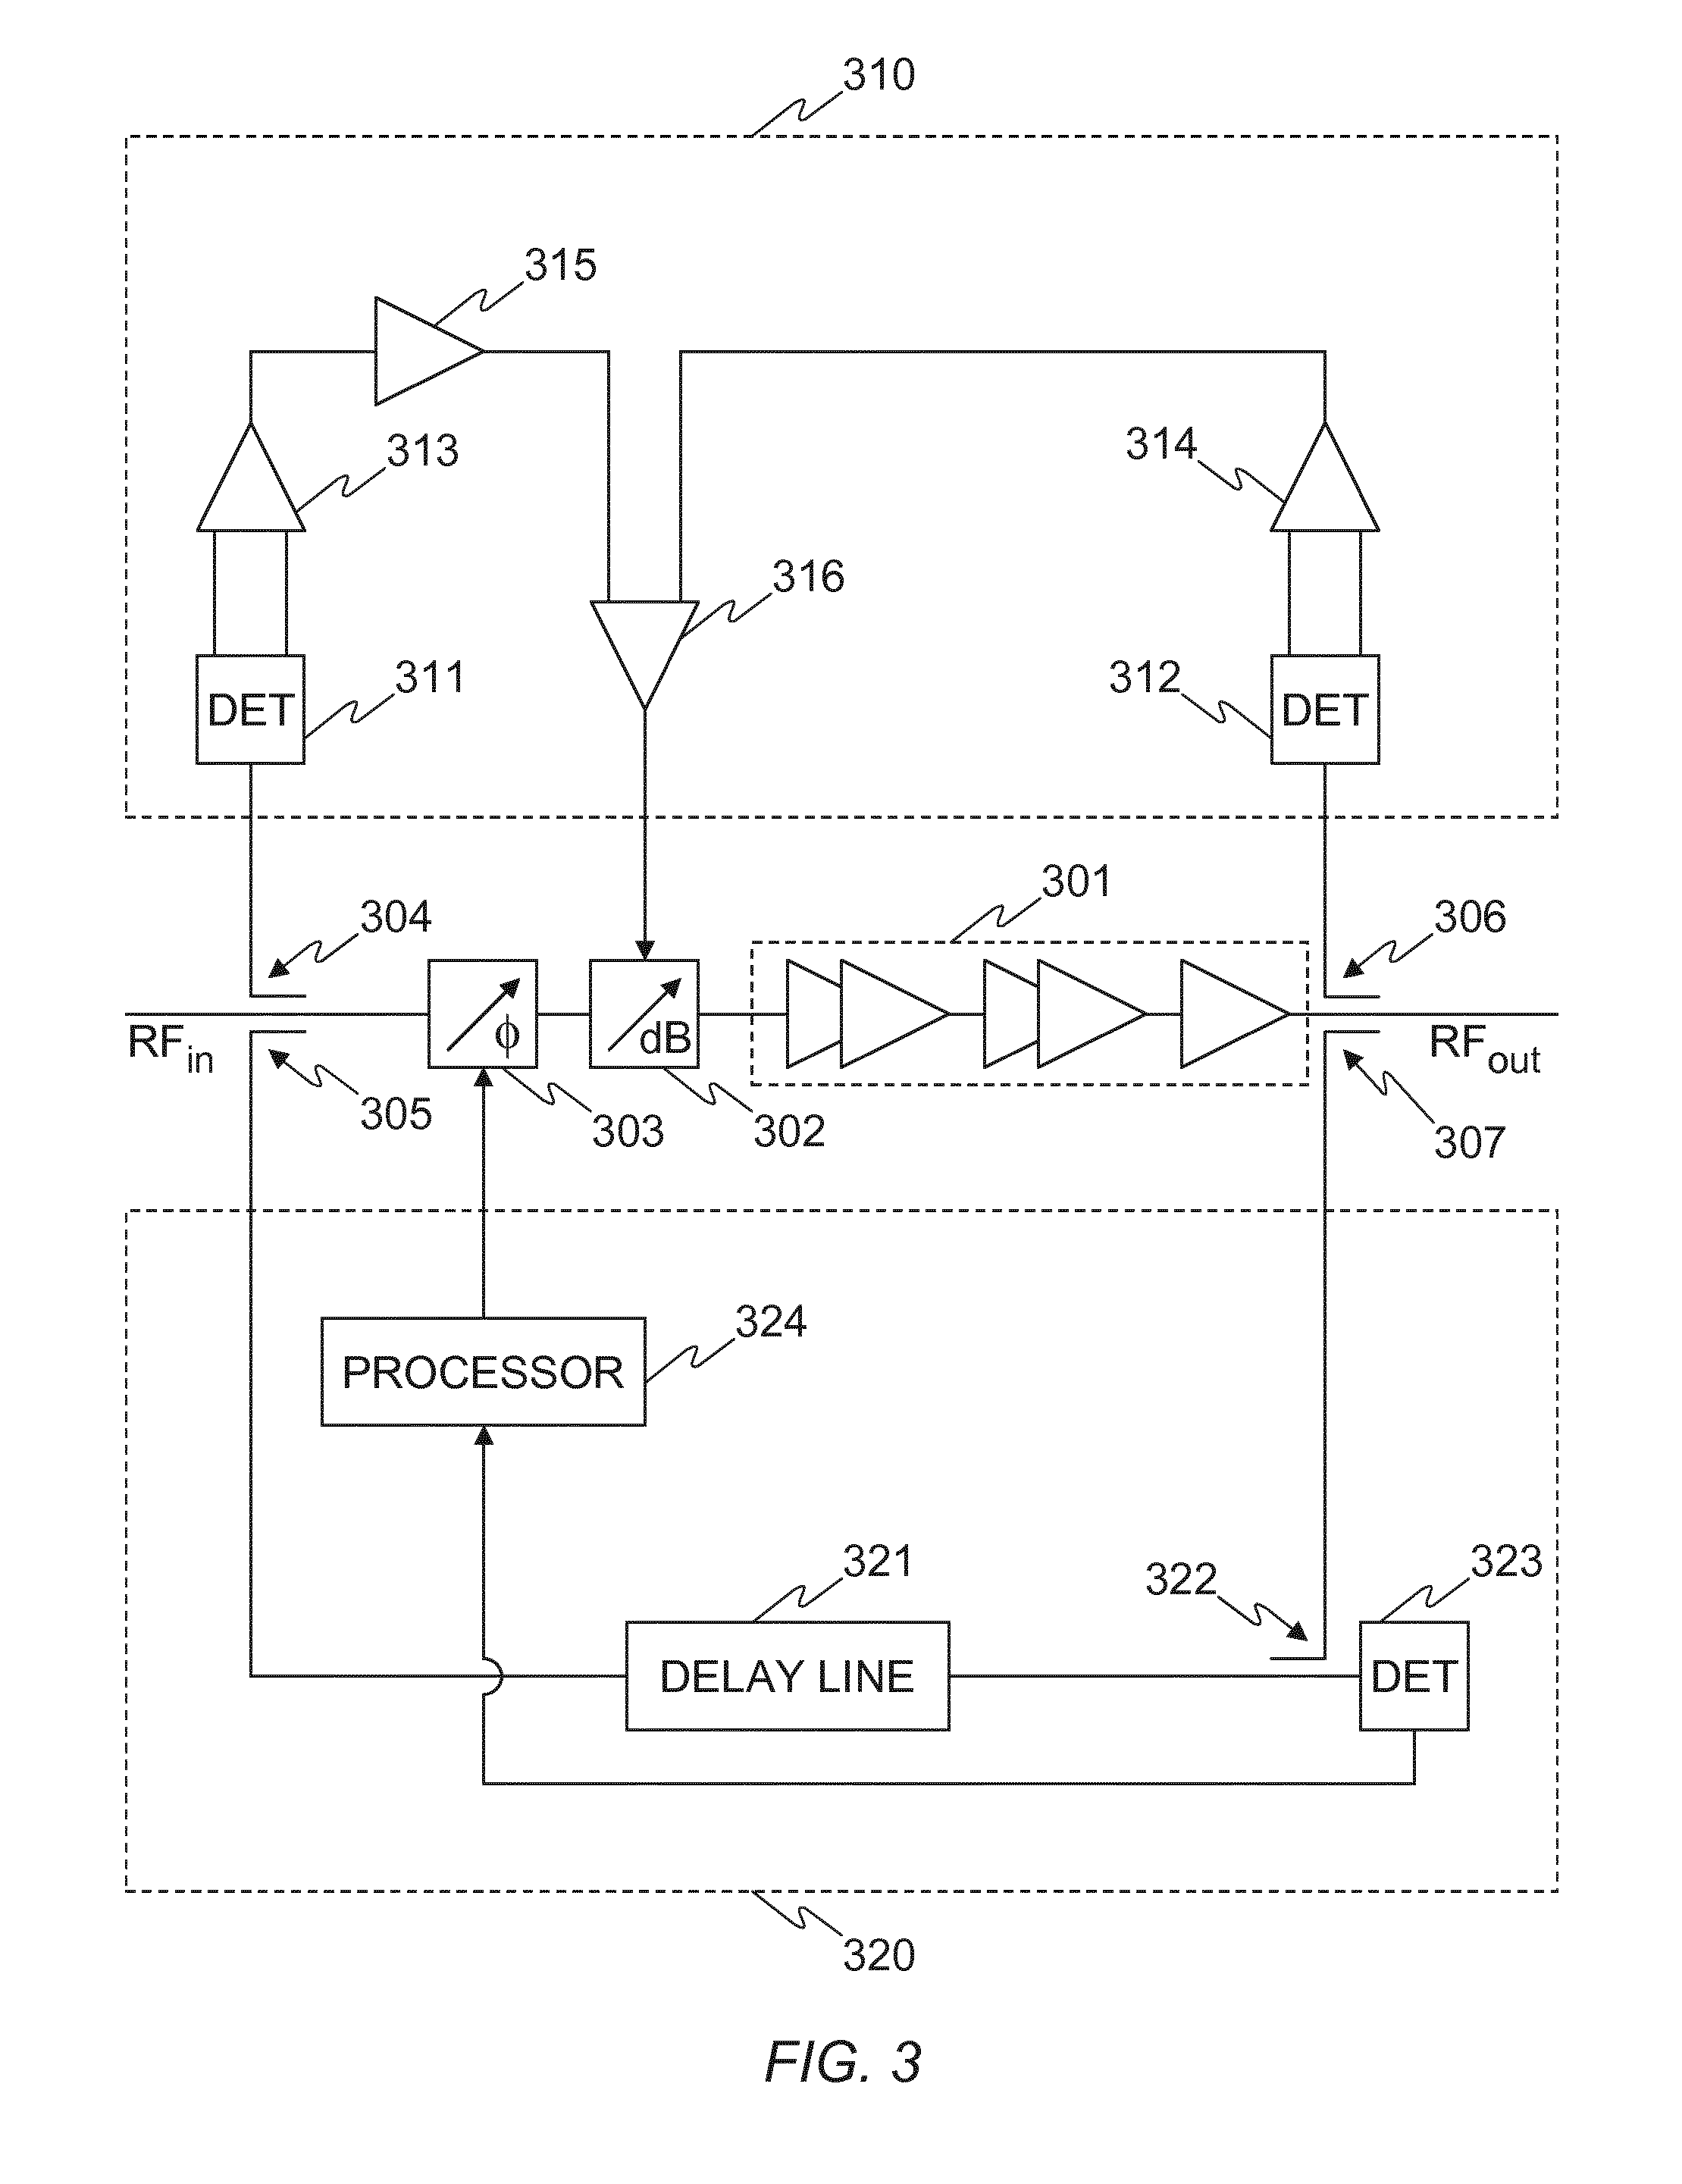 Control system for a power amplifier